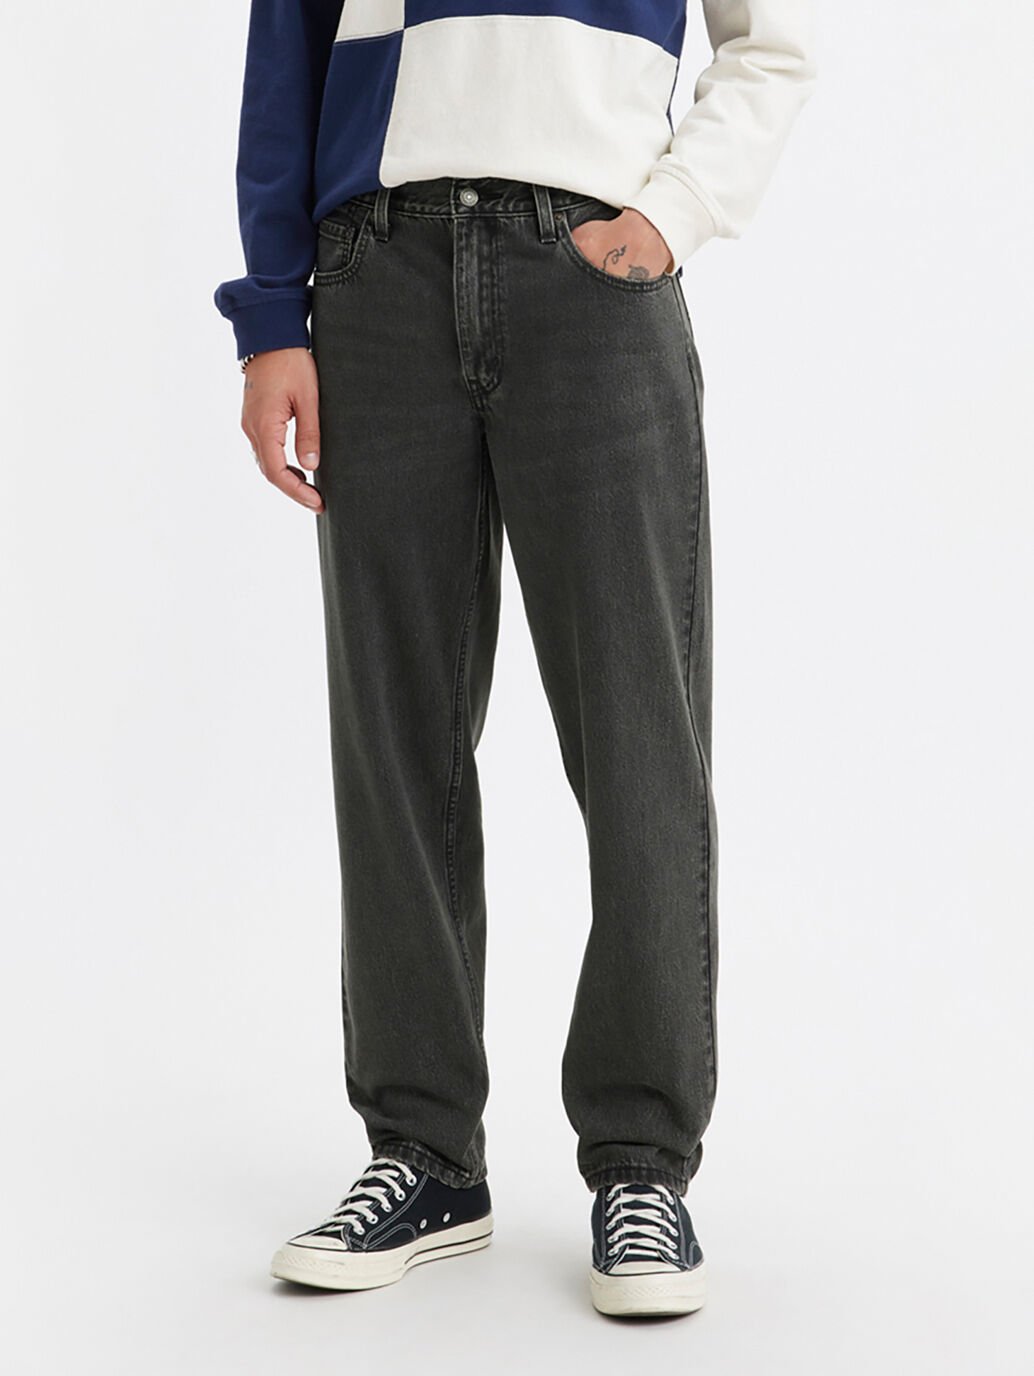 Levi's® Men's 550™ '92 Relaxed Taper Jeans